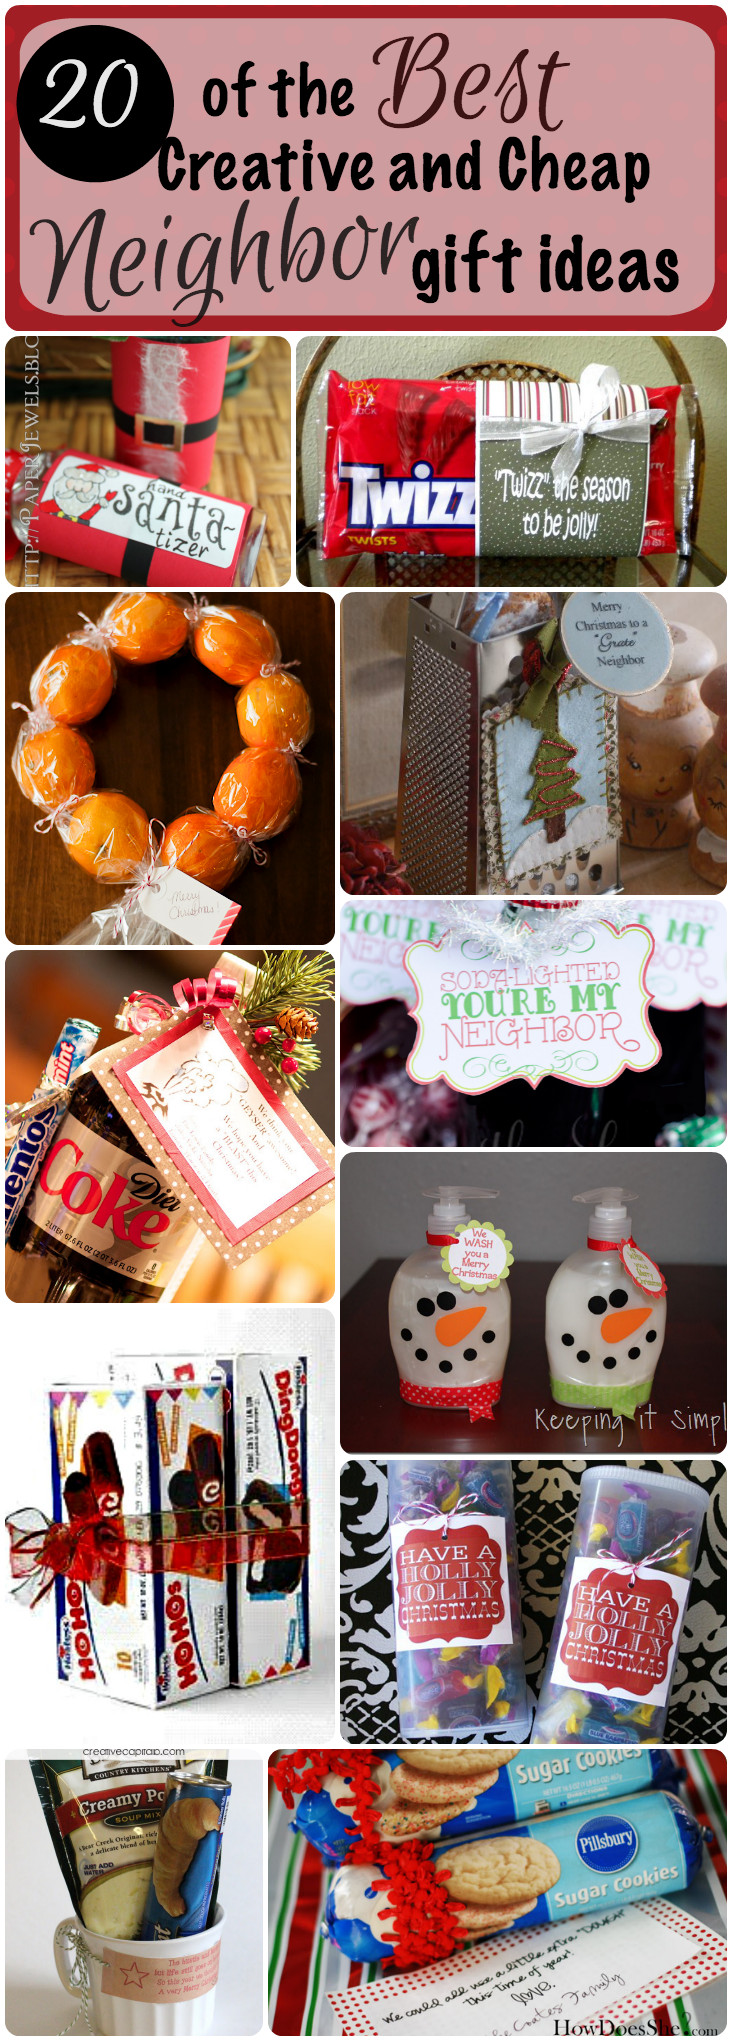 Neighbor Christmas Gift Ideas
 20 of the Best Creative and Cheap Neighbor Gifts for Christmas